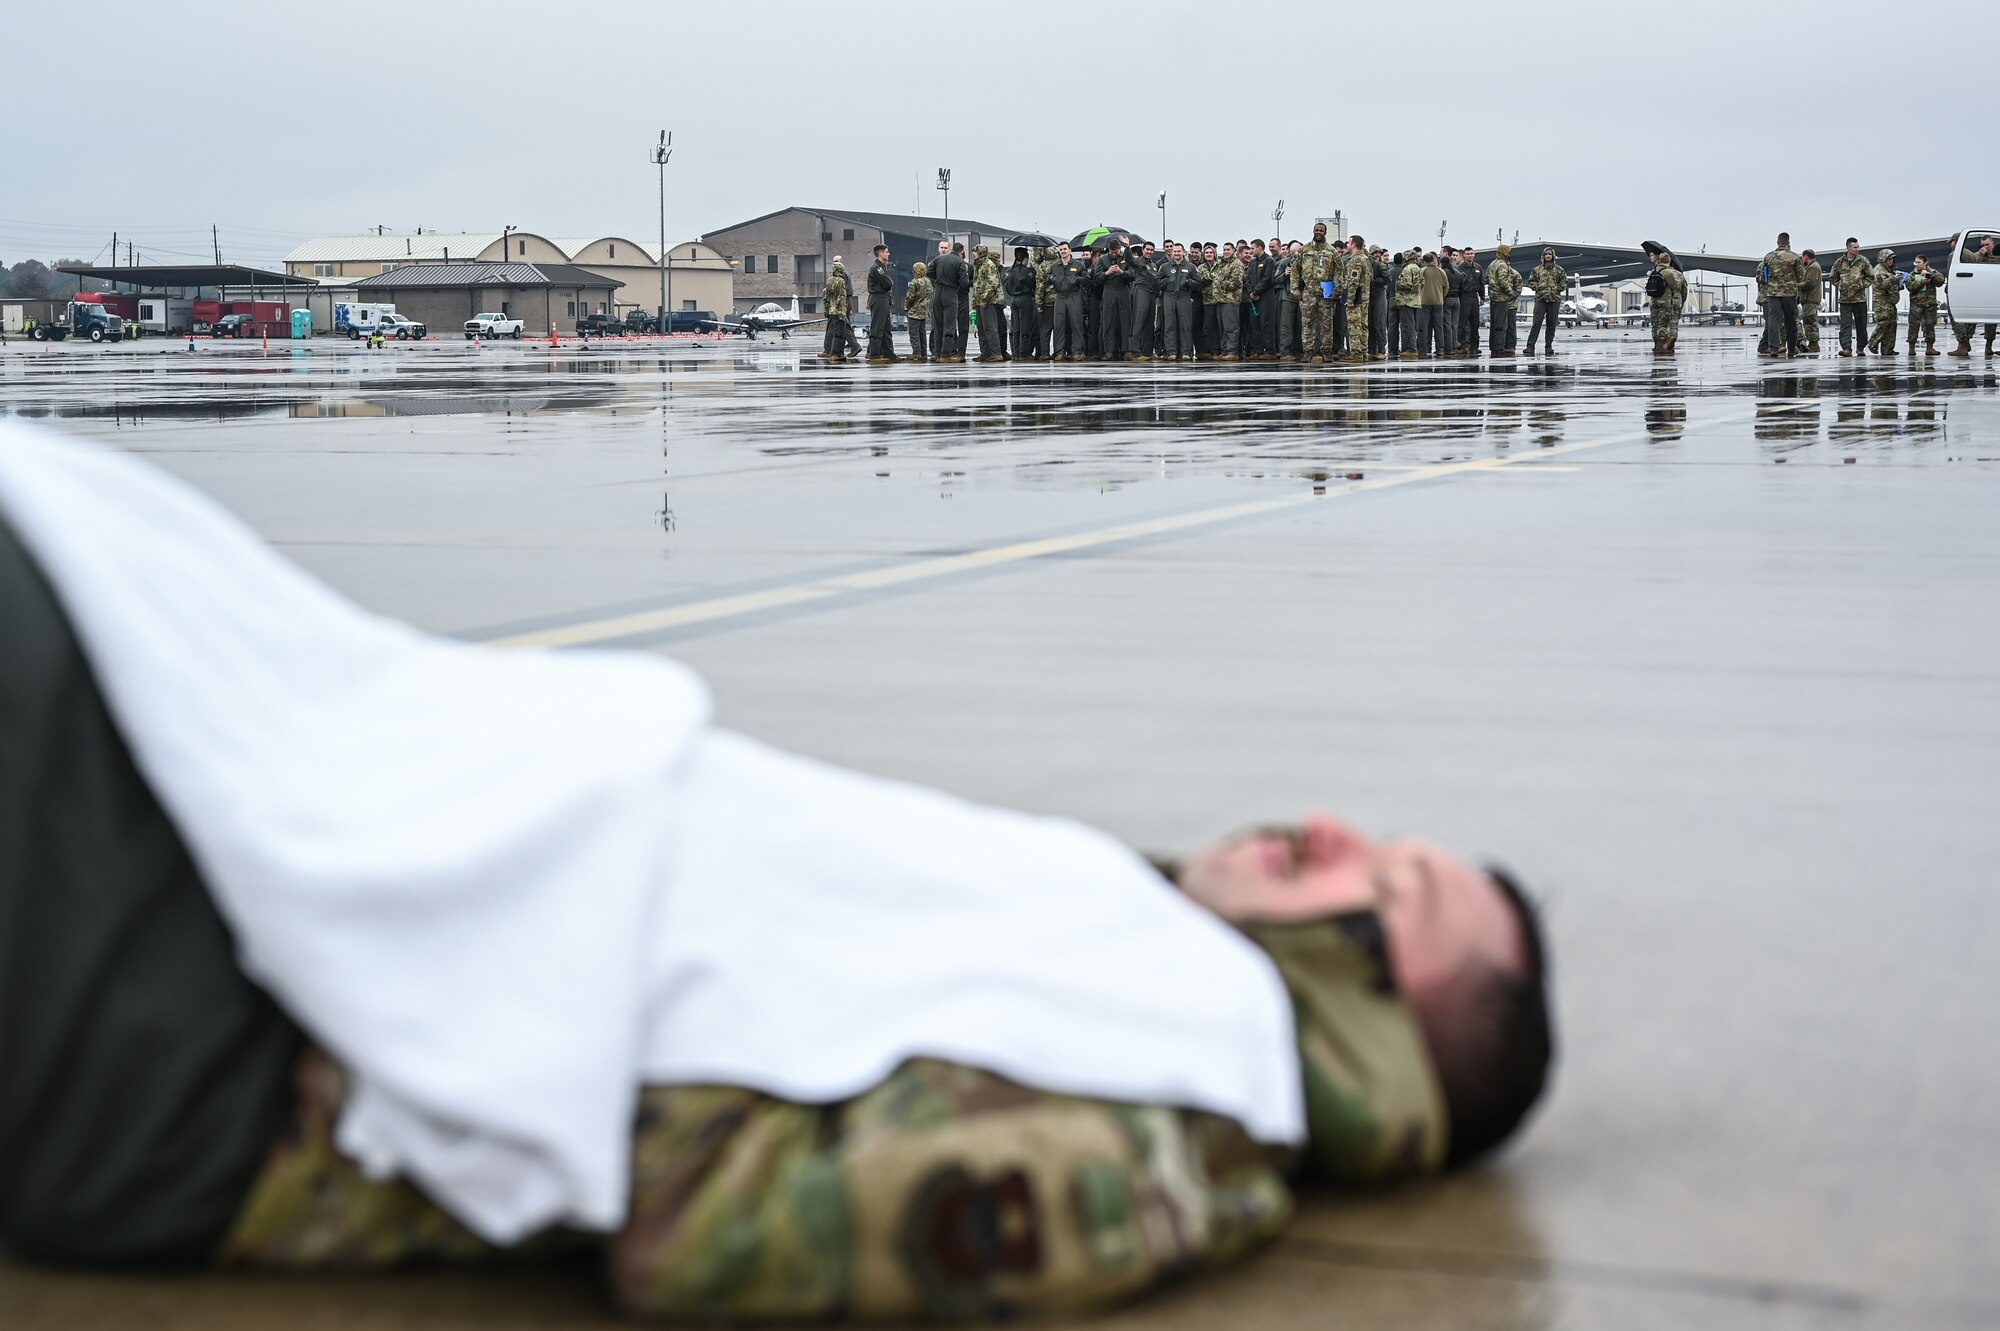 U.S. Air Force Airmen from the 47th Student Squadron, simulating an air show crowd, witness an exercise casualty body from afar during a Major Accident Response Exercise (MARE) on the flight line at Laughlin Air Force Base, Texas, Dec. 14, 2023.